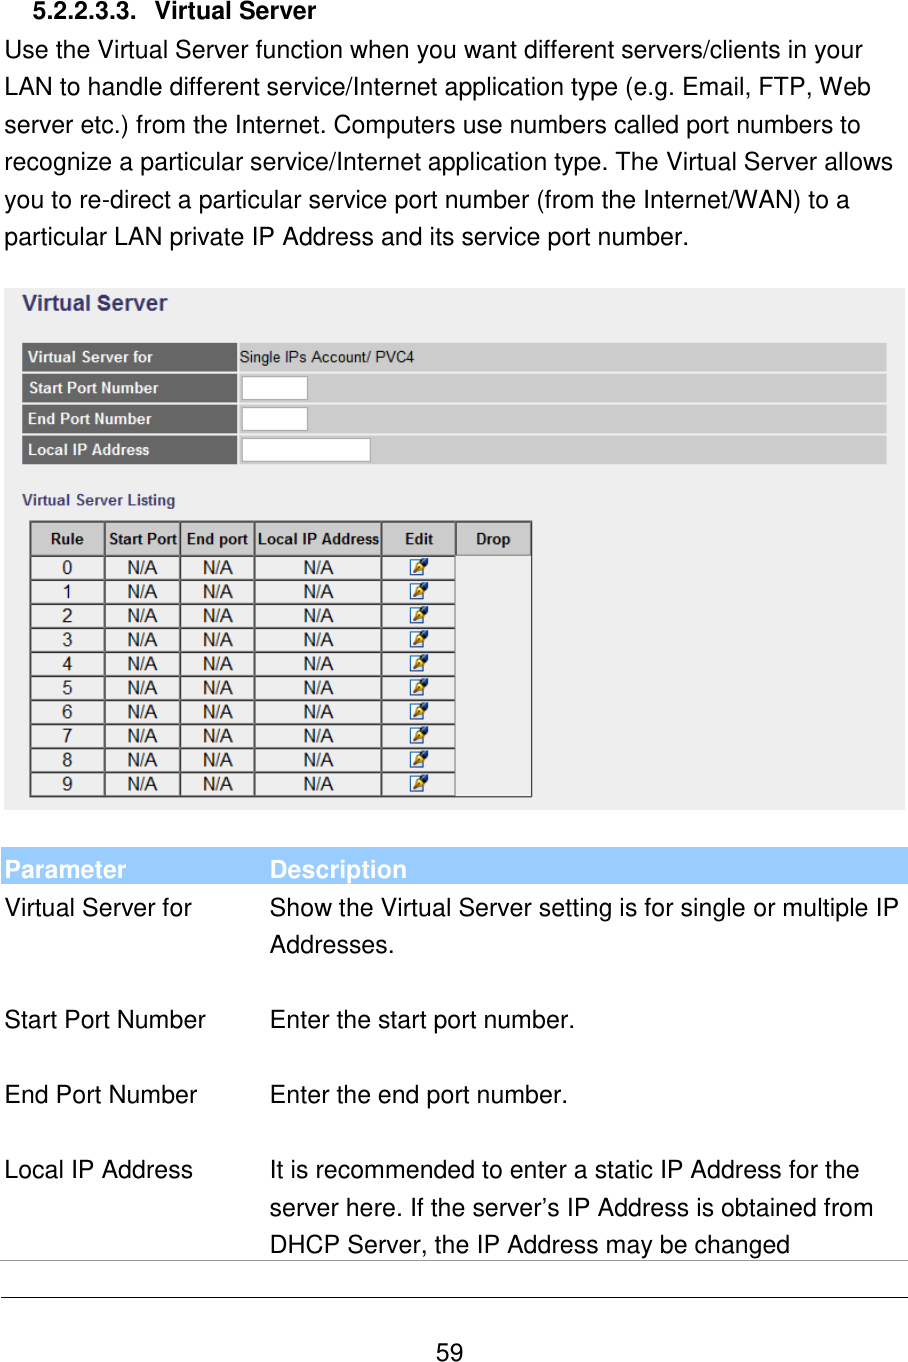   59  5.2.2.3.3.  Virtual Server Use the Virtual Server function when you want different servers/clients in your LAN to handle different service/Internet application type (e.g. Email, FTP, Web server etc.) from the Internet. Computers use numbers called port numbers to recognize a particular service/Internet application type. The Virtual Server allows you to re-direct a particular service port number (from the Internet/WAN) to a particular LAN private IP Address and its service port number.    Parameter Description Virtual Server for Show the Virtual Server setting is for single or multiple IP Addresses.   Start Port Number Enter the start port number.   End Port Number Enter the end port number.   Local IP Address It is recommended to enter a static IP Address for the server here. If the server‟s IP Address is obtained from DHCP Server, the IP Address may be changed 